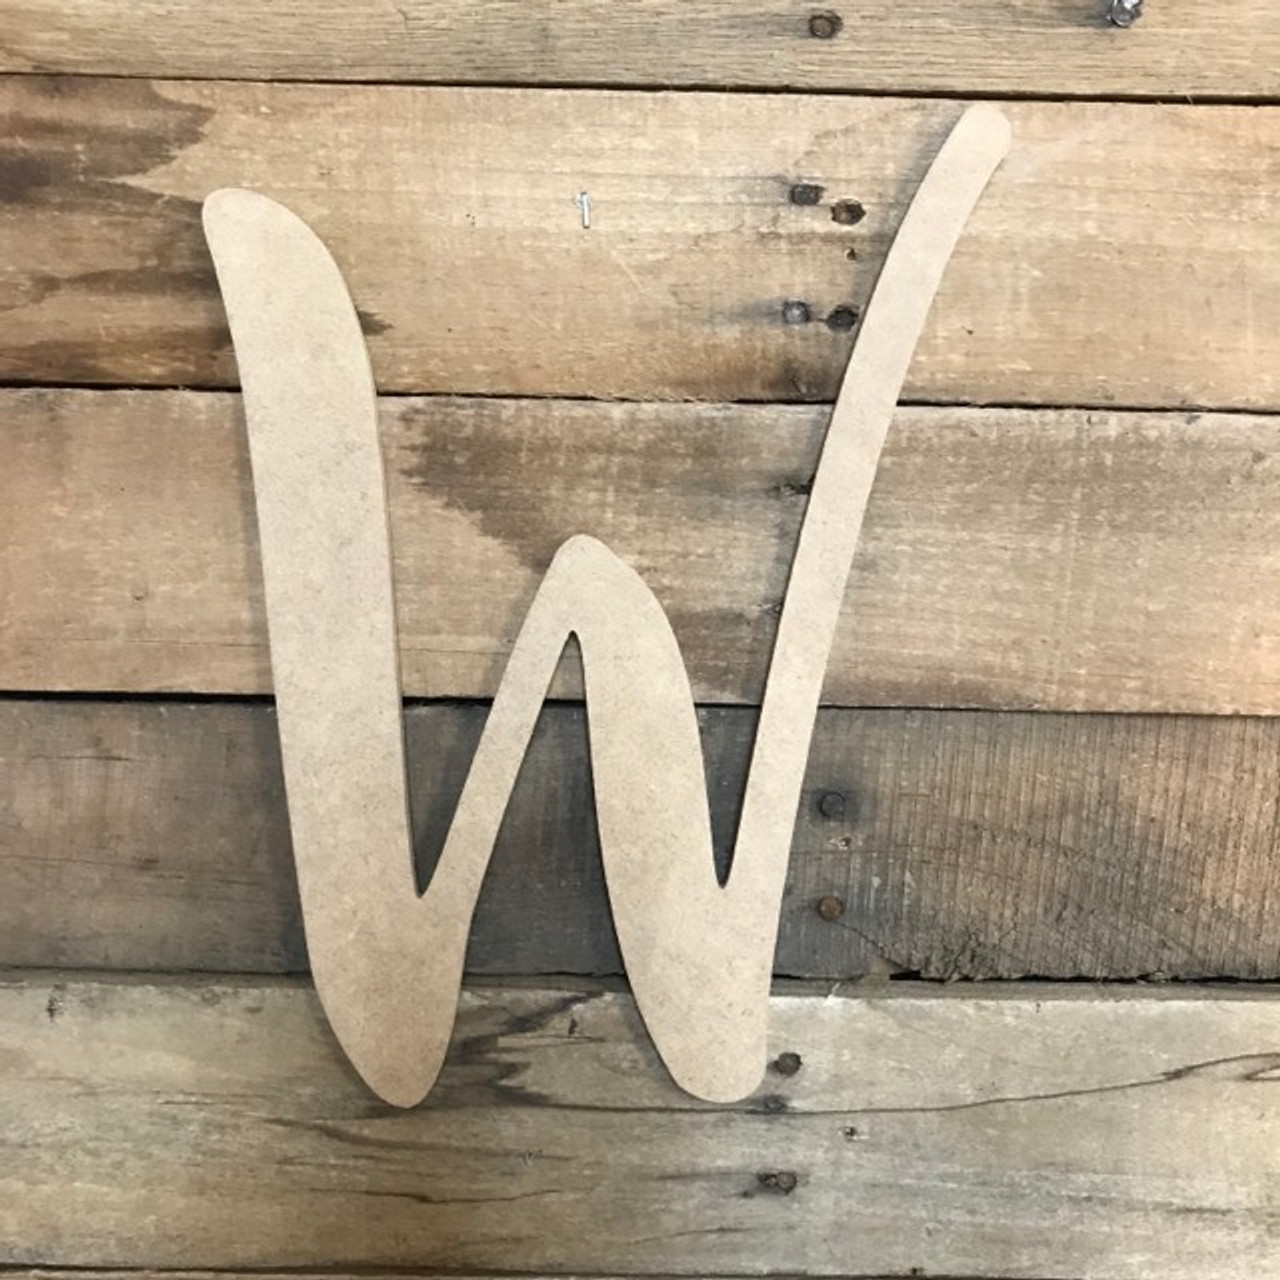 Custom wood wall letters - Little Crown Interiors